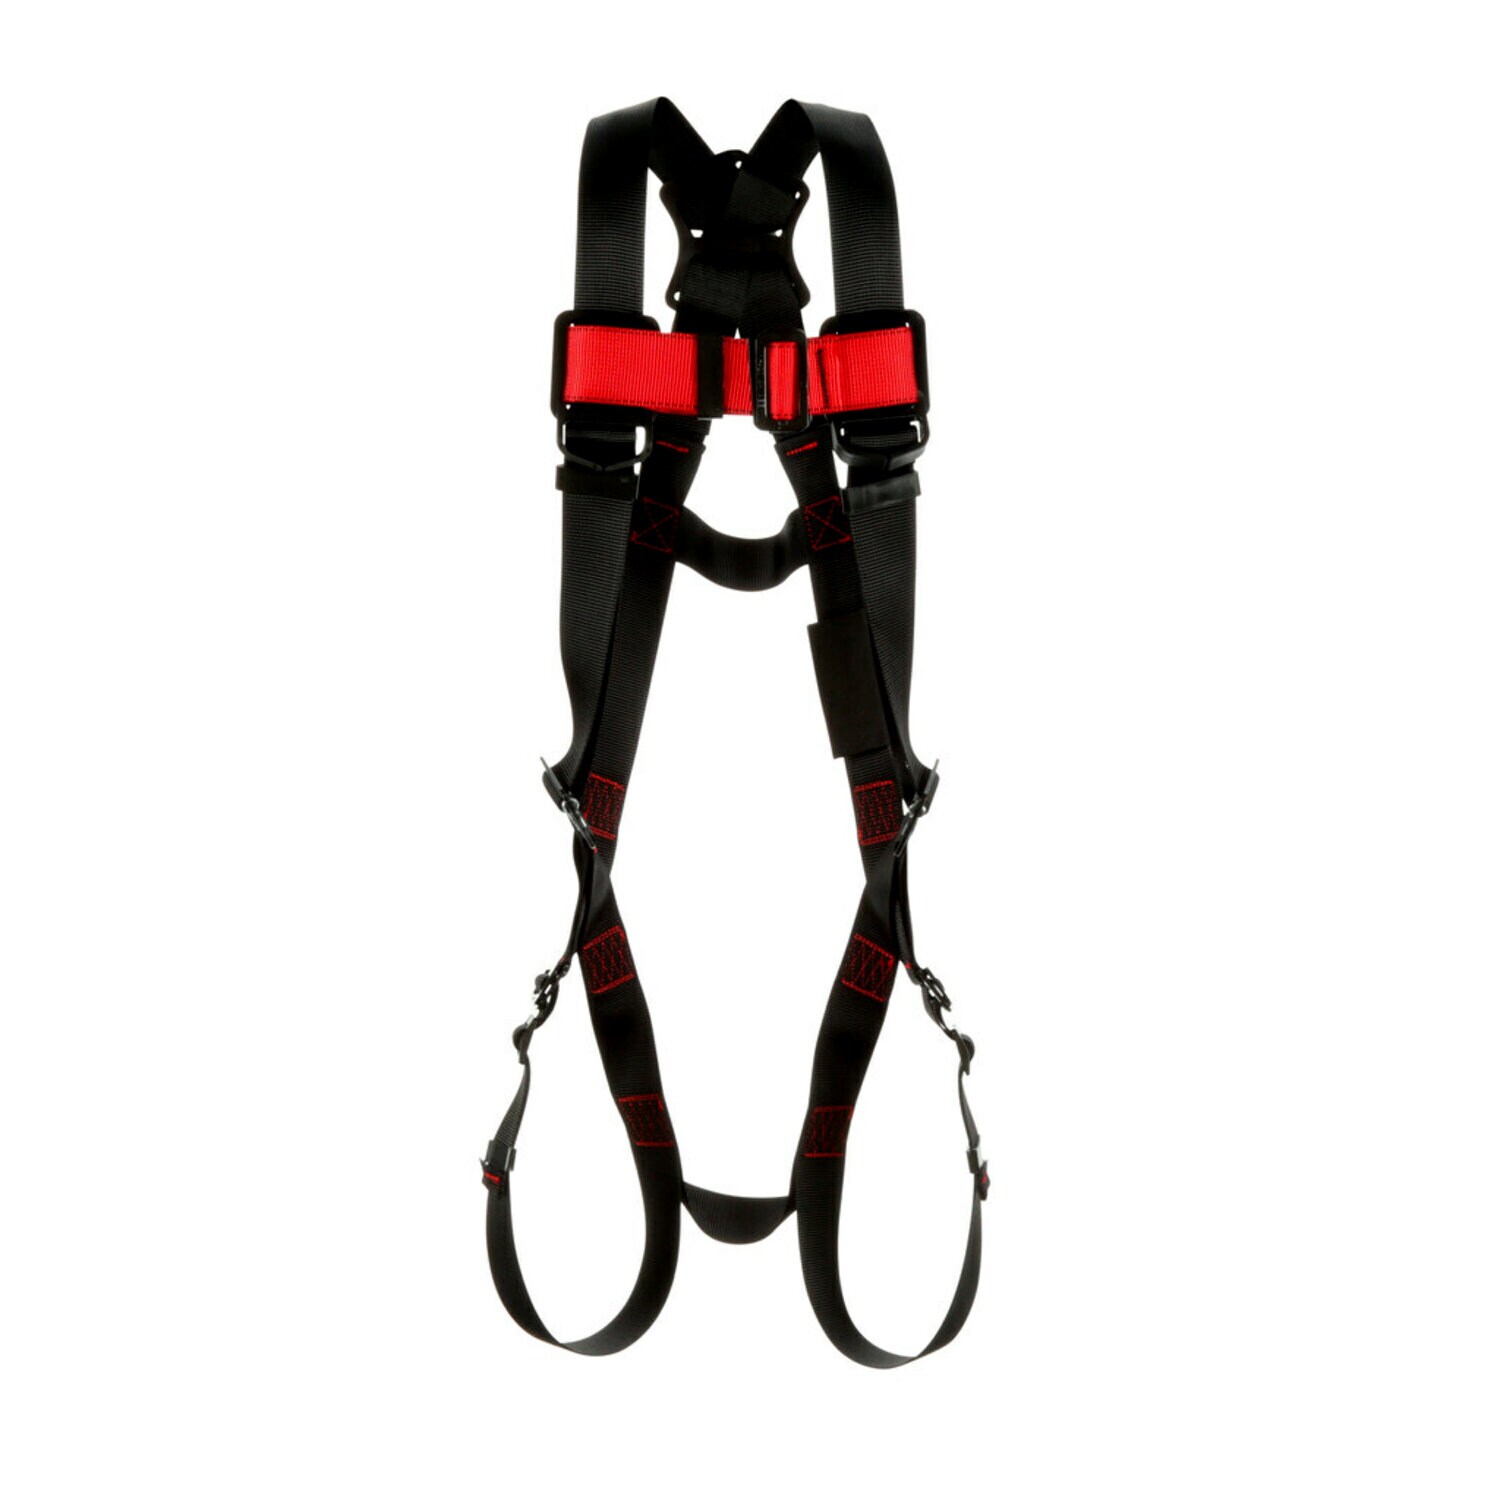 7100184595 - 3M Protecta P200 Vest Safety Harness 1161572, X-Large